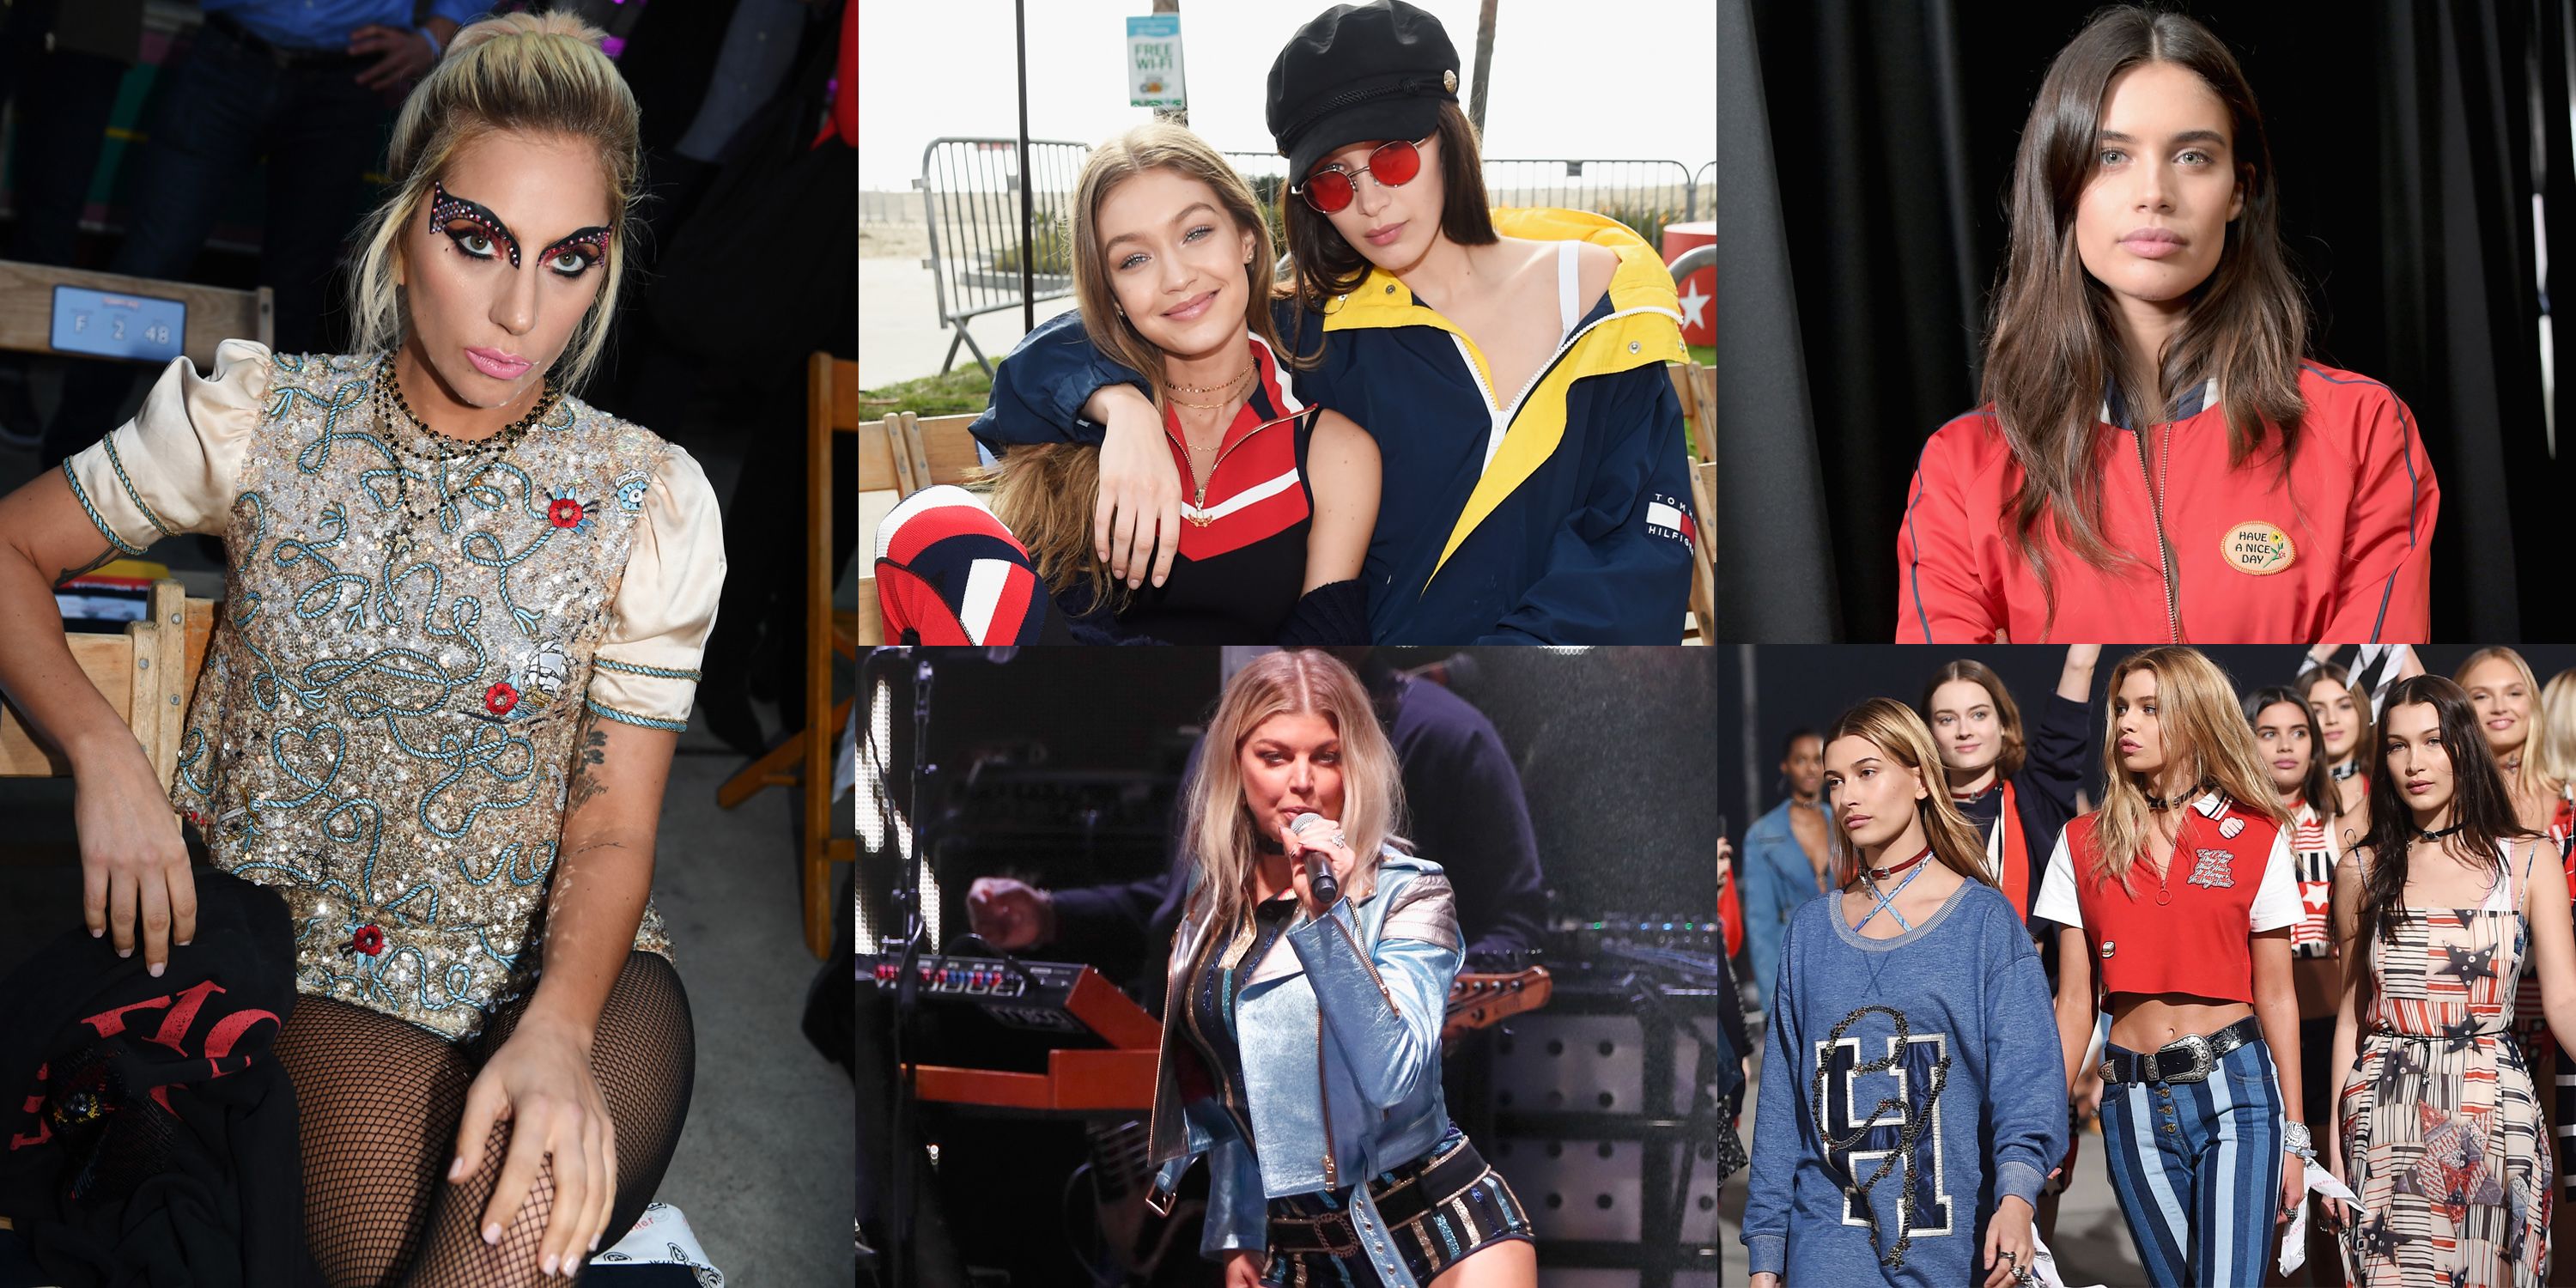 Tommy Hilfiger in row over Gigi Hadid collaboration